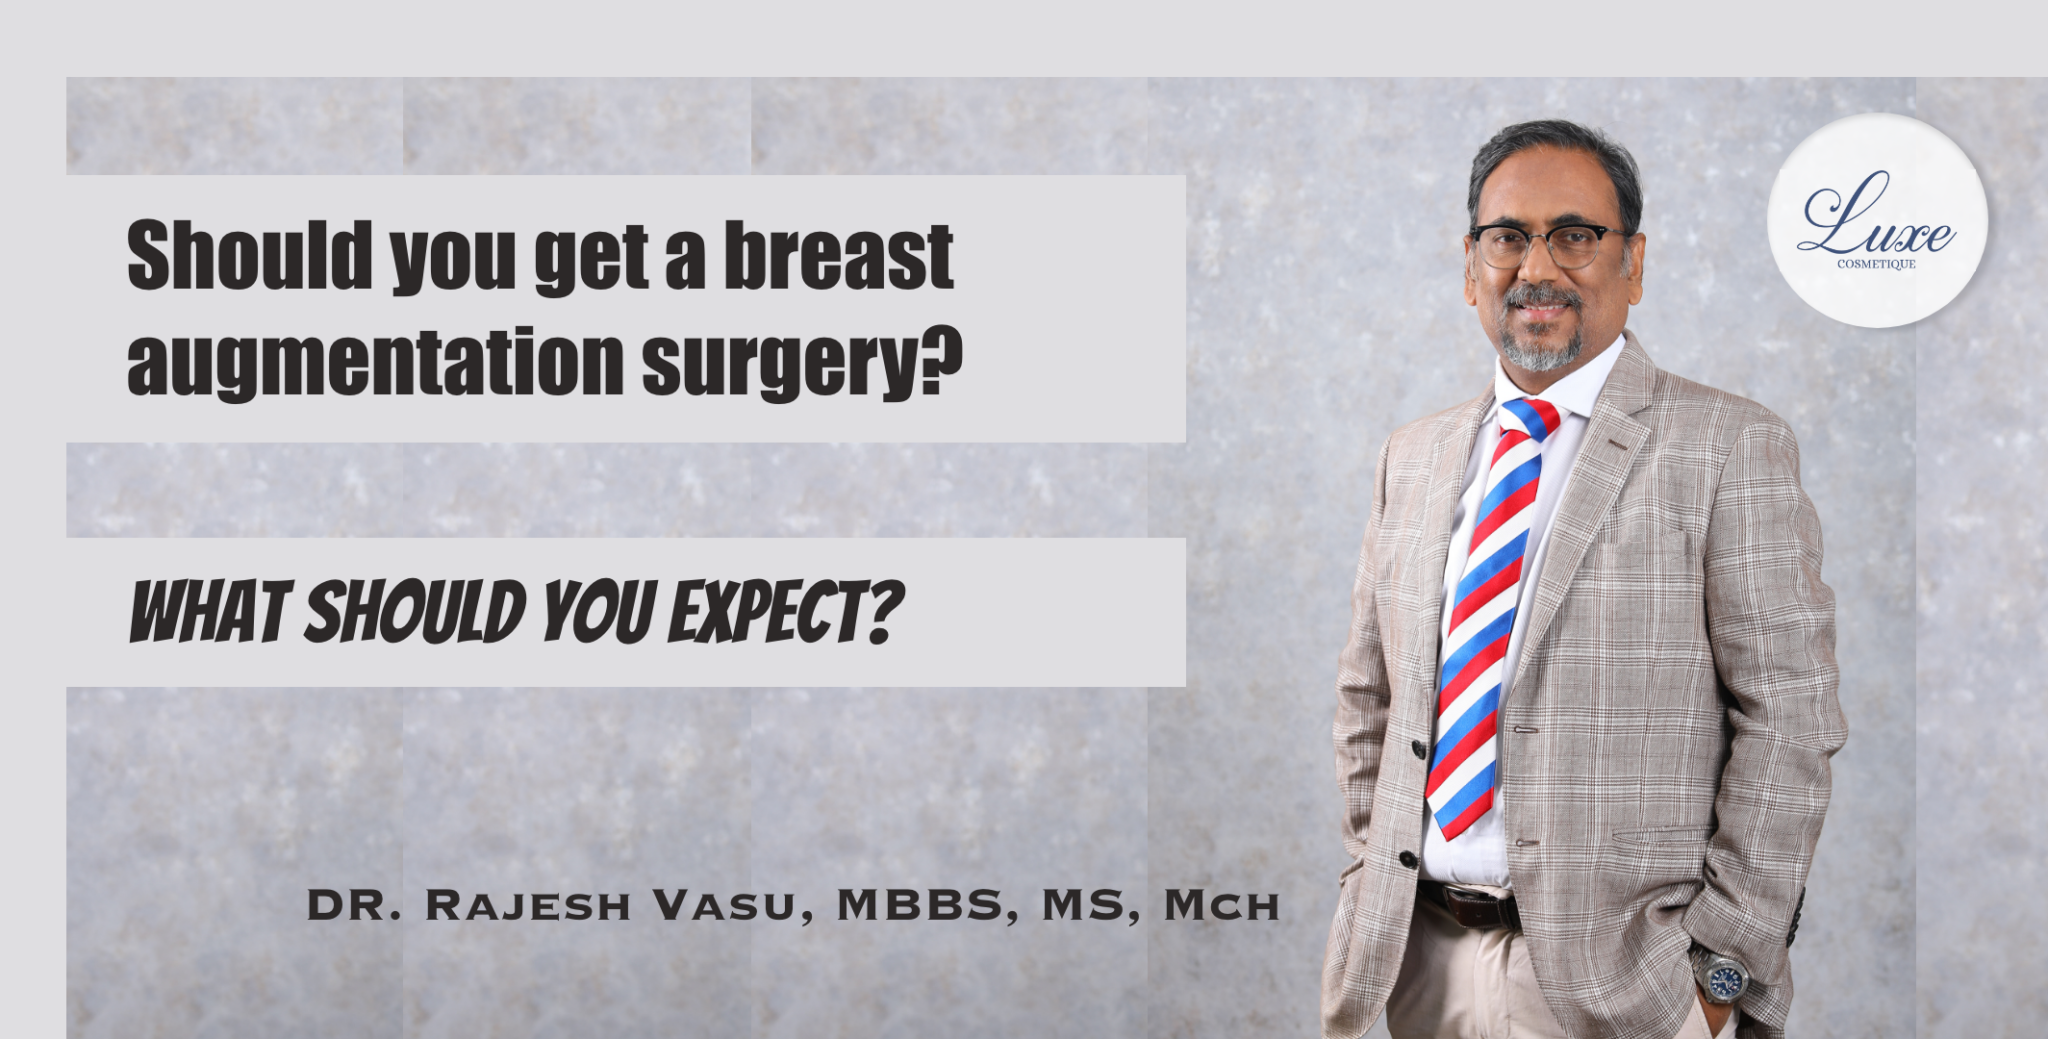 Should you get a breast augmentation surgery? What should you expect?